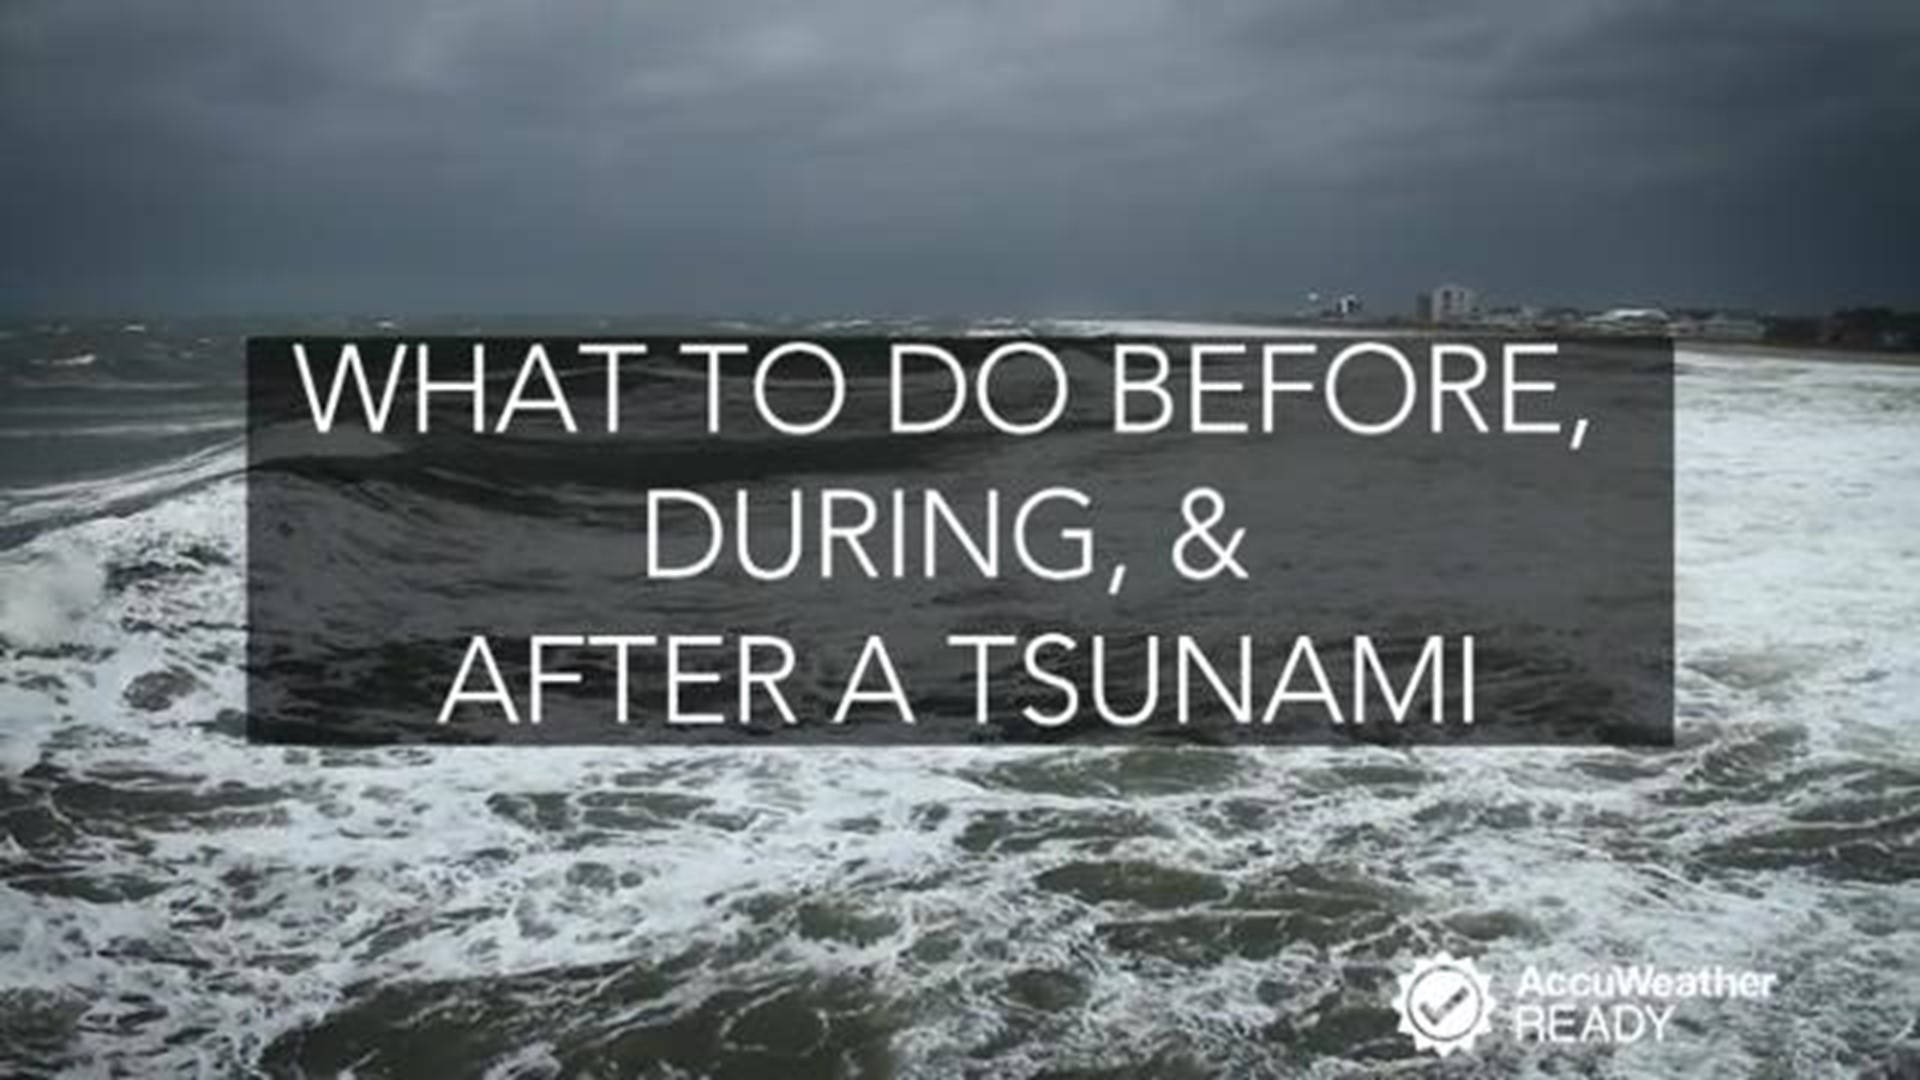 Tsunamis are difficult to detect and predict, but you can still protect yourself.